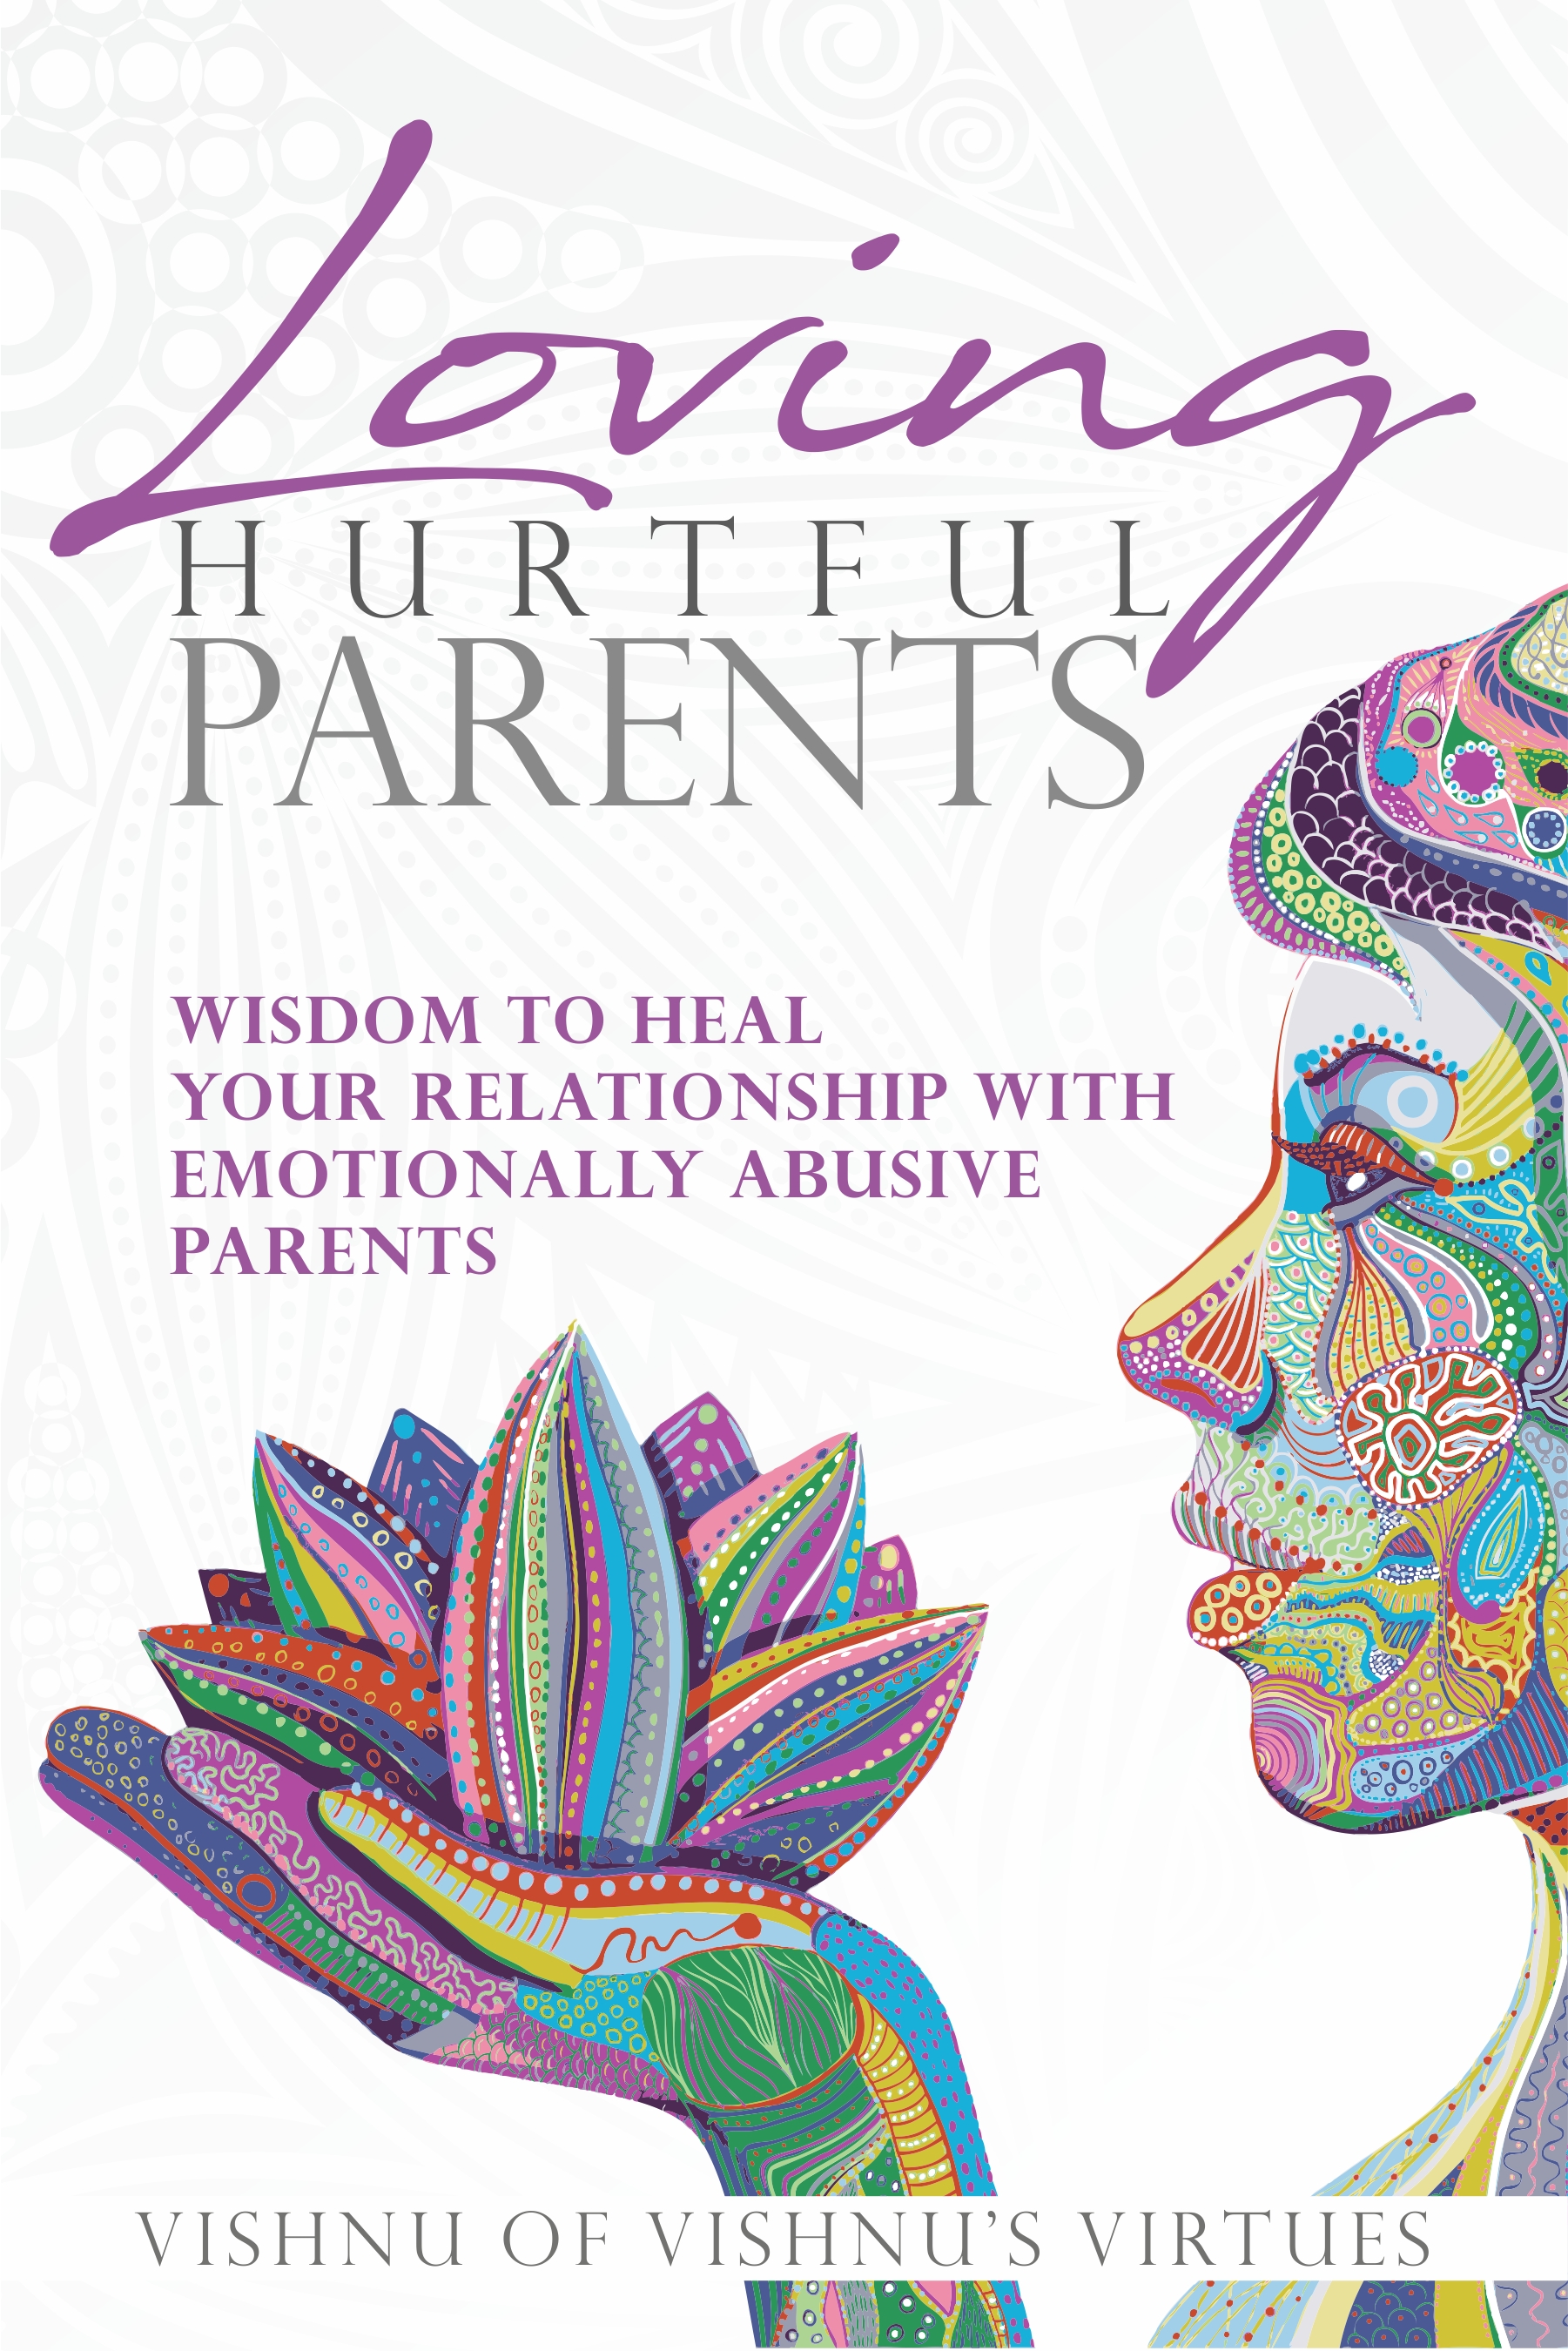 FREE: Loving Hurtful Parents: Wisdom to Heal Your Relationship With Emotionally Abusive Parents by Vishnu’s Virtues